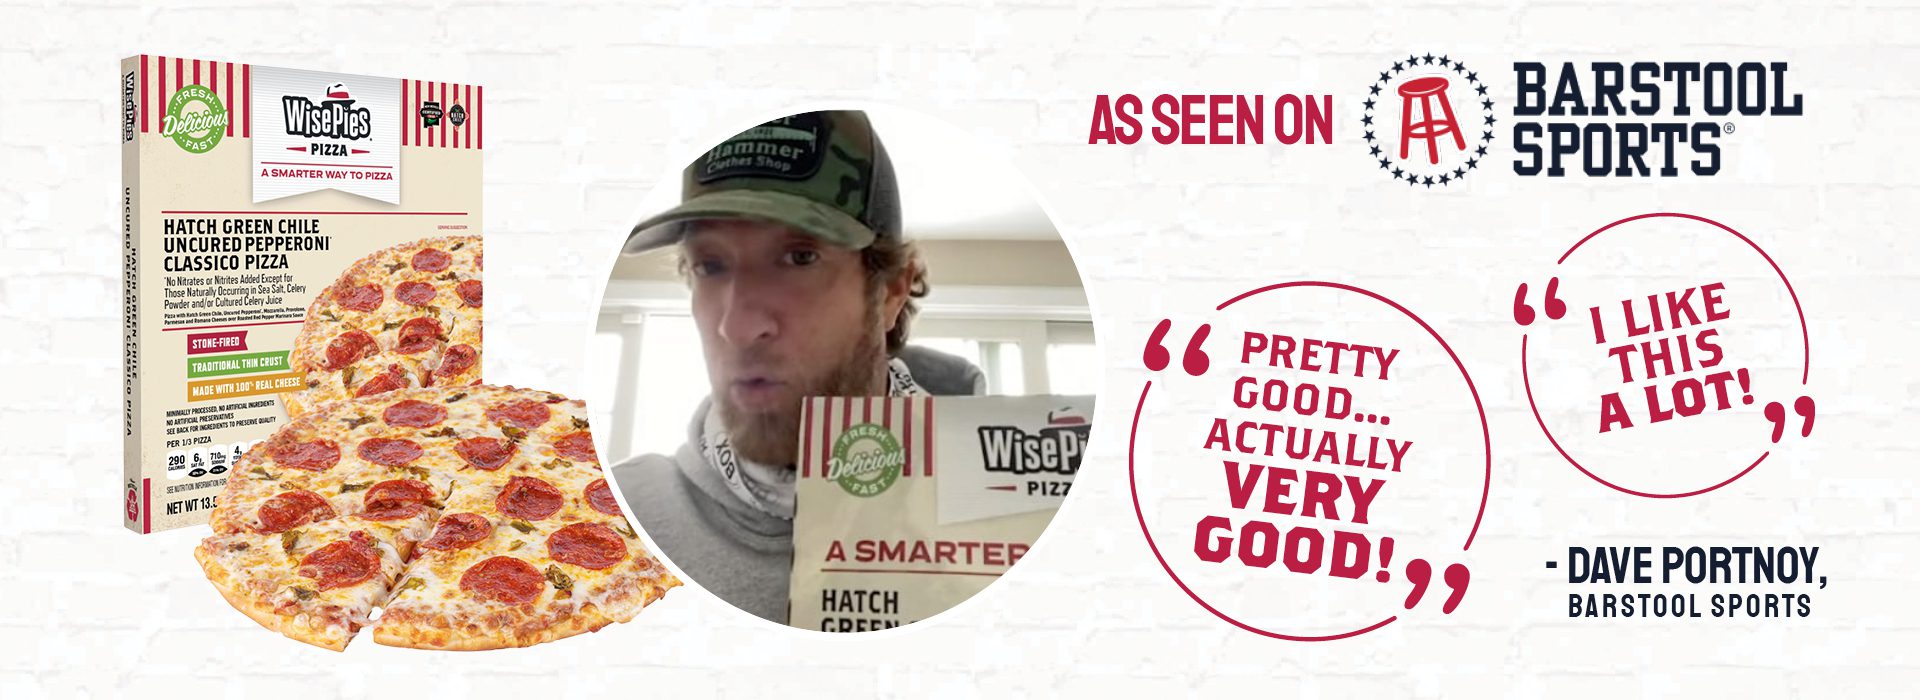 Image of Dave Portnoy endorsing WisePies deliciously fresh pizzas